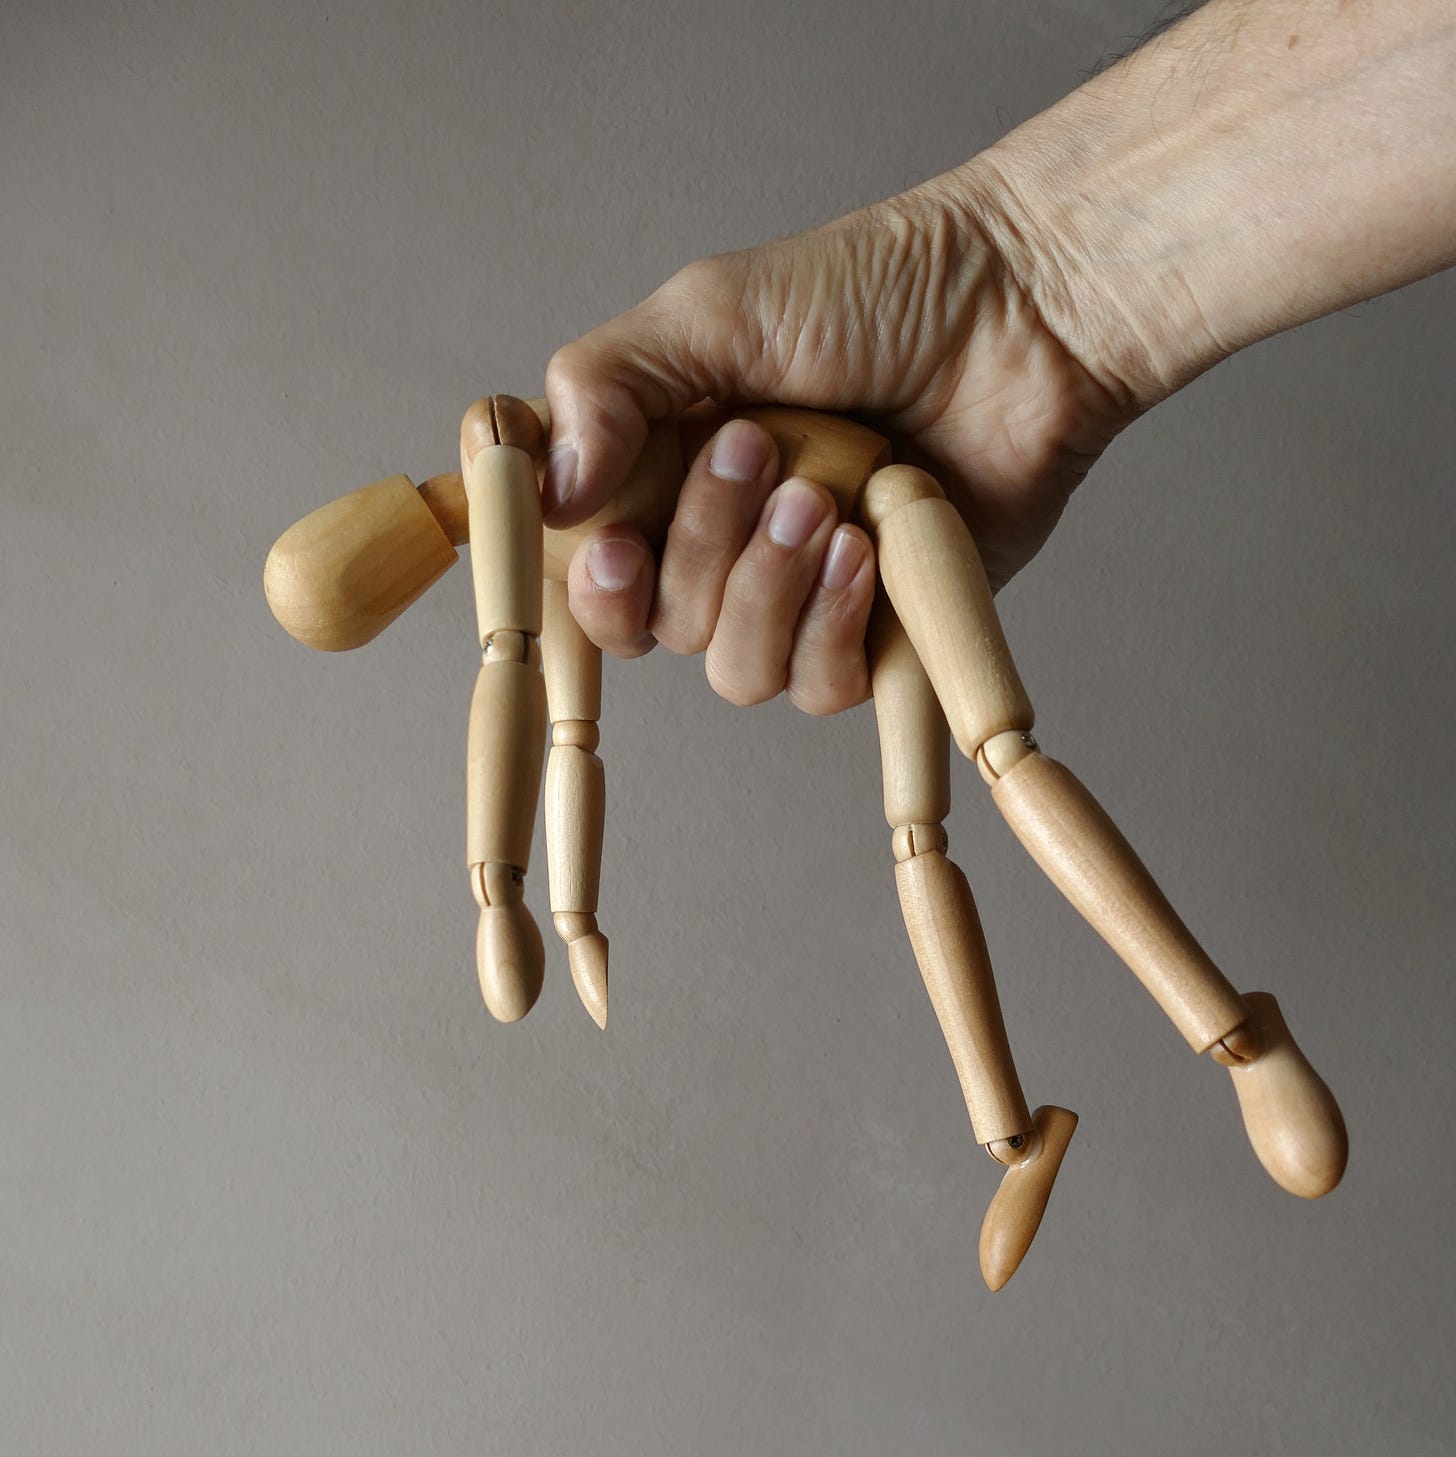 Hand roughly holding jointed wooden doll